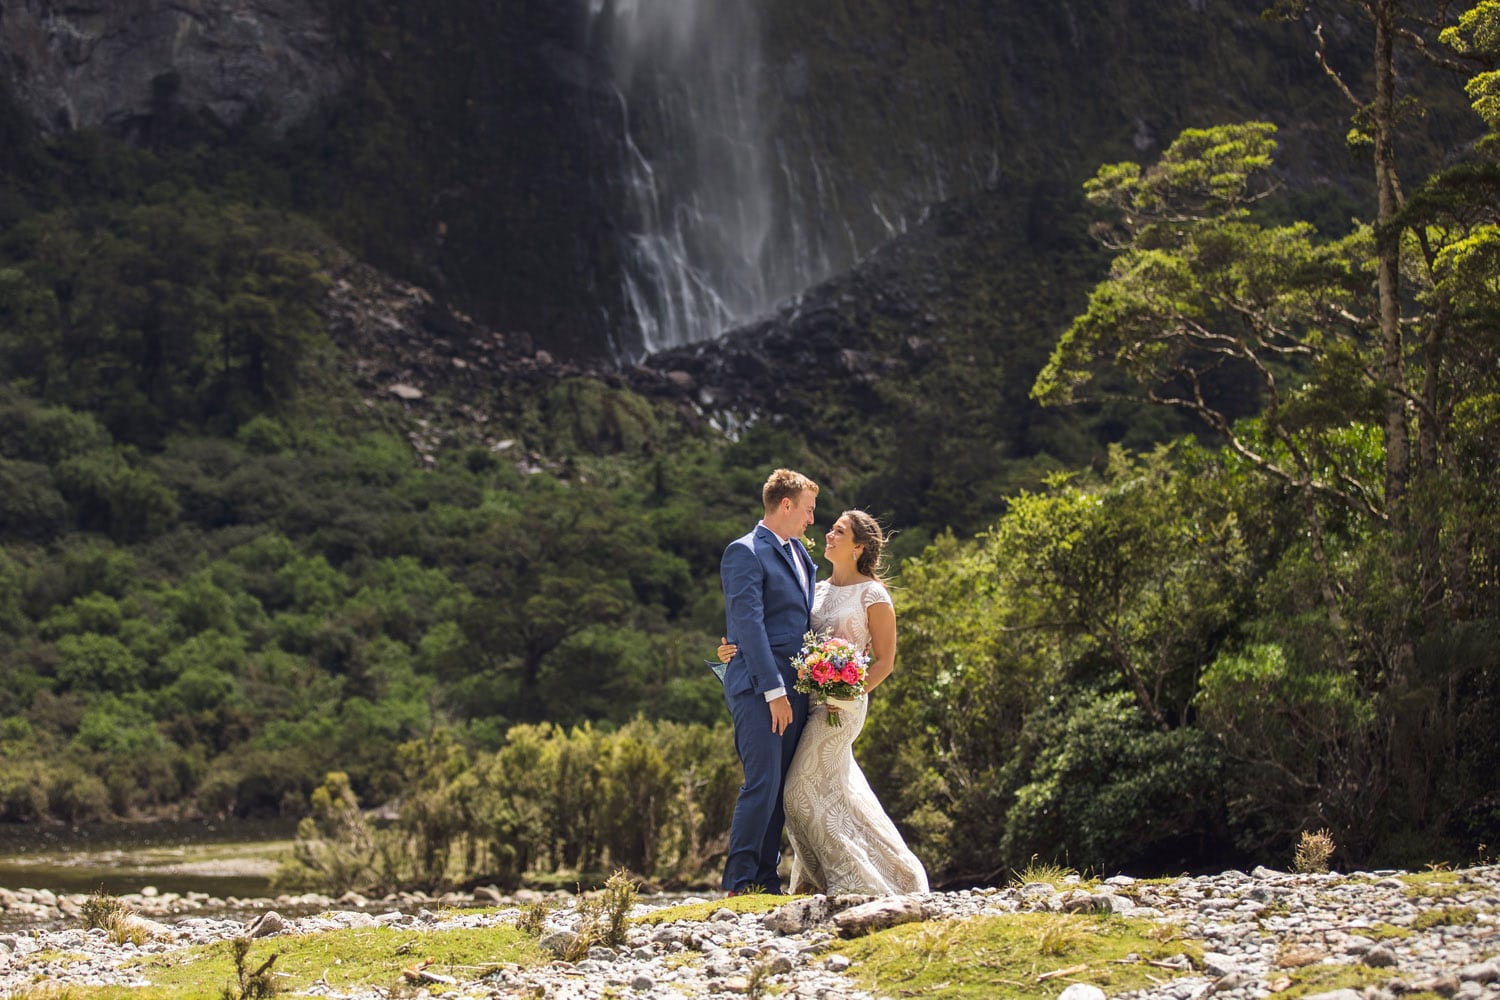 The Majestic Wedding Package Queenstown